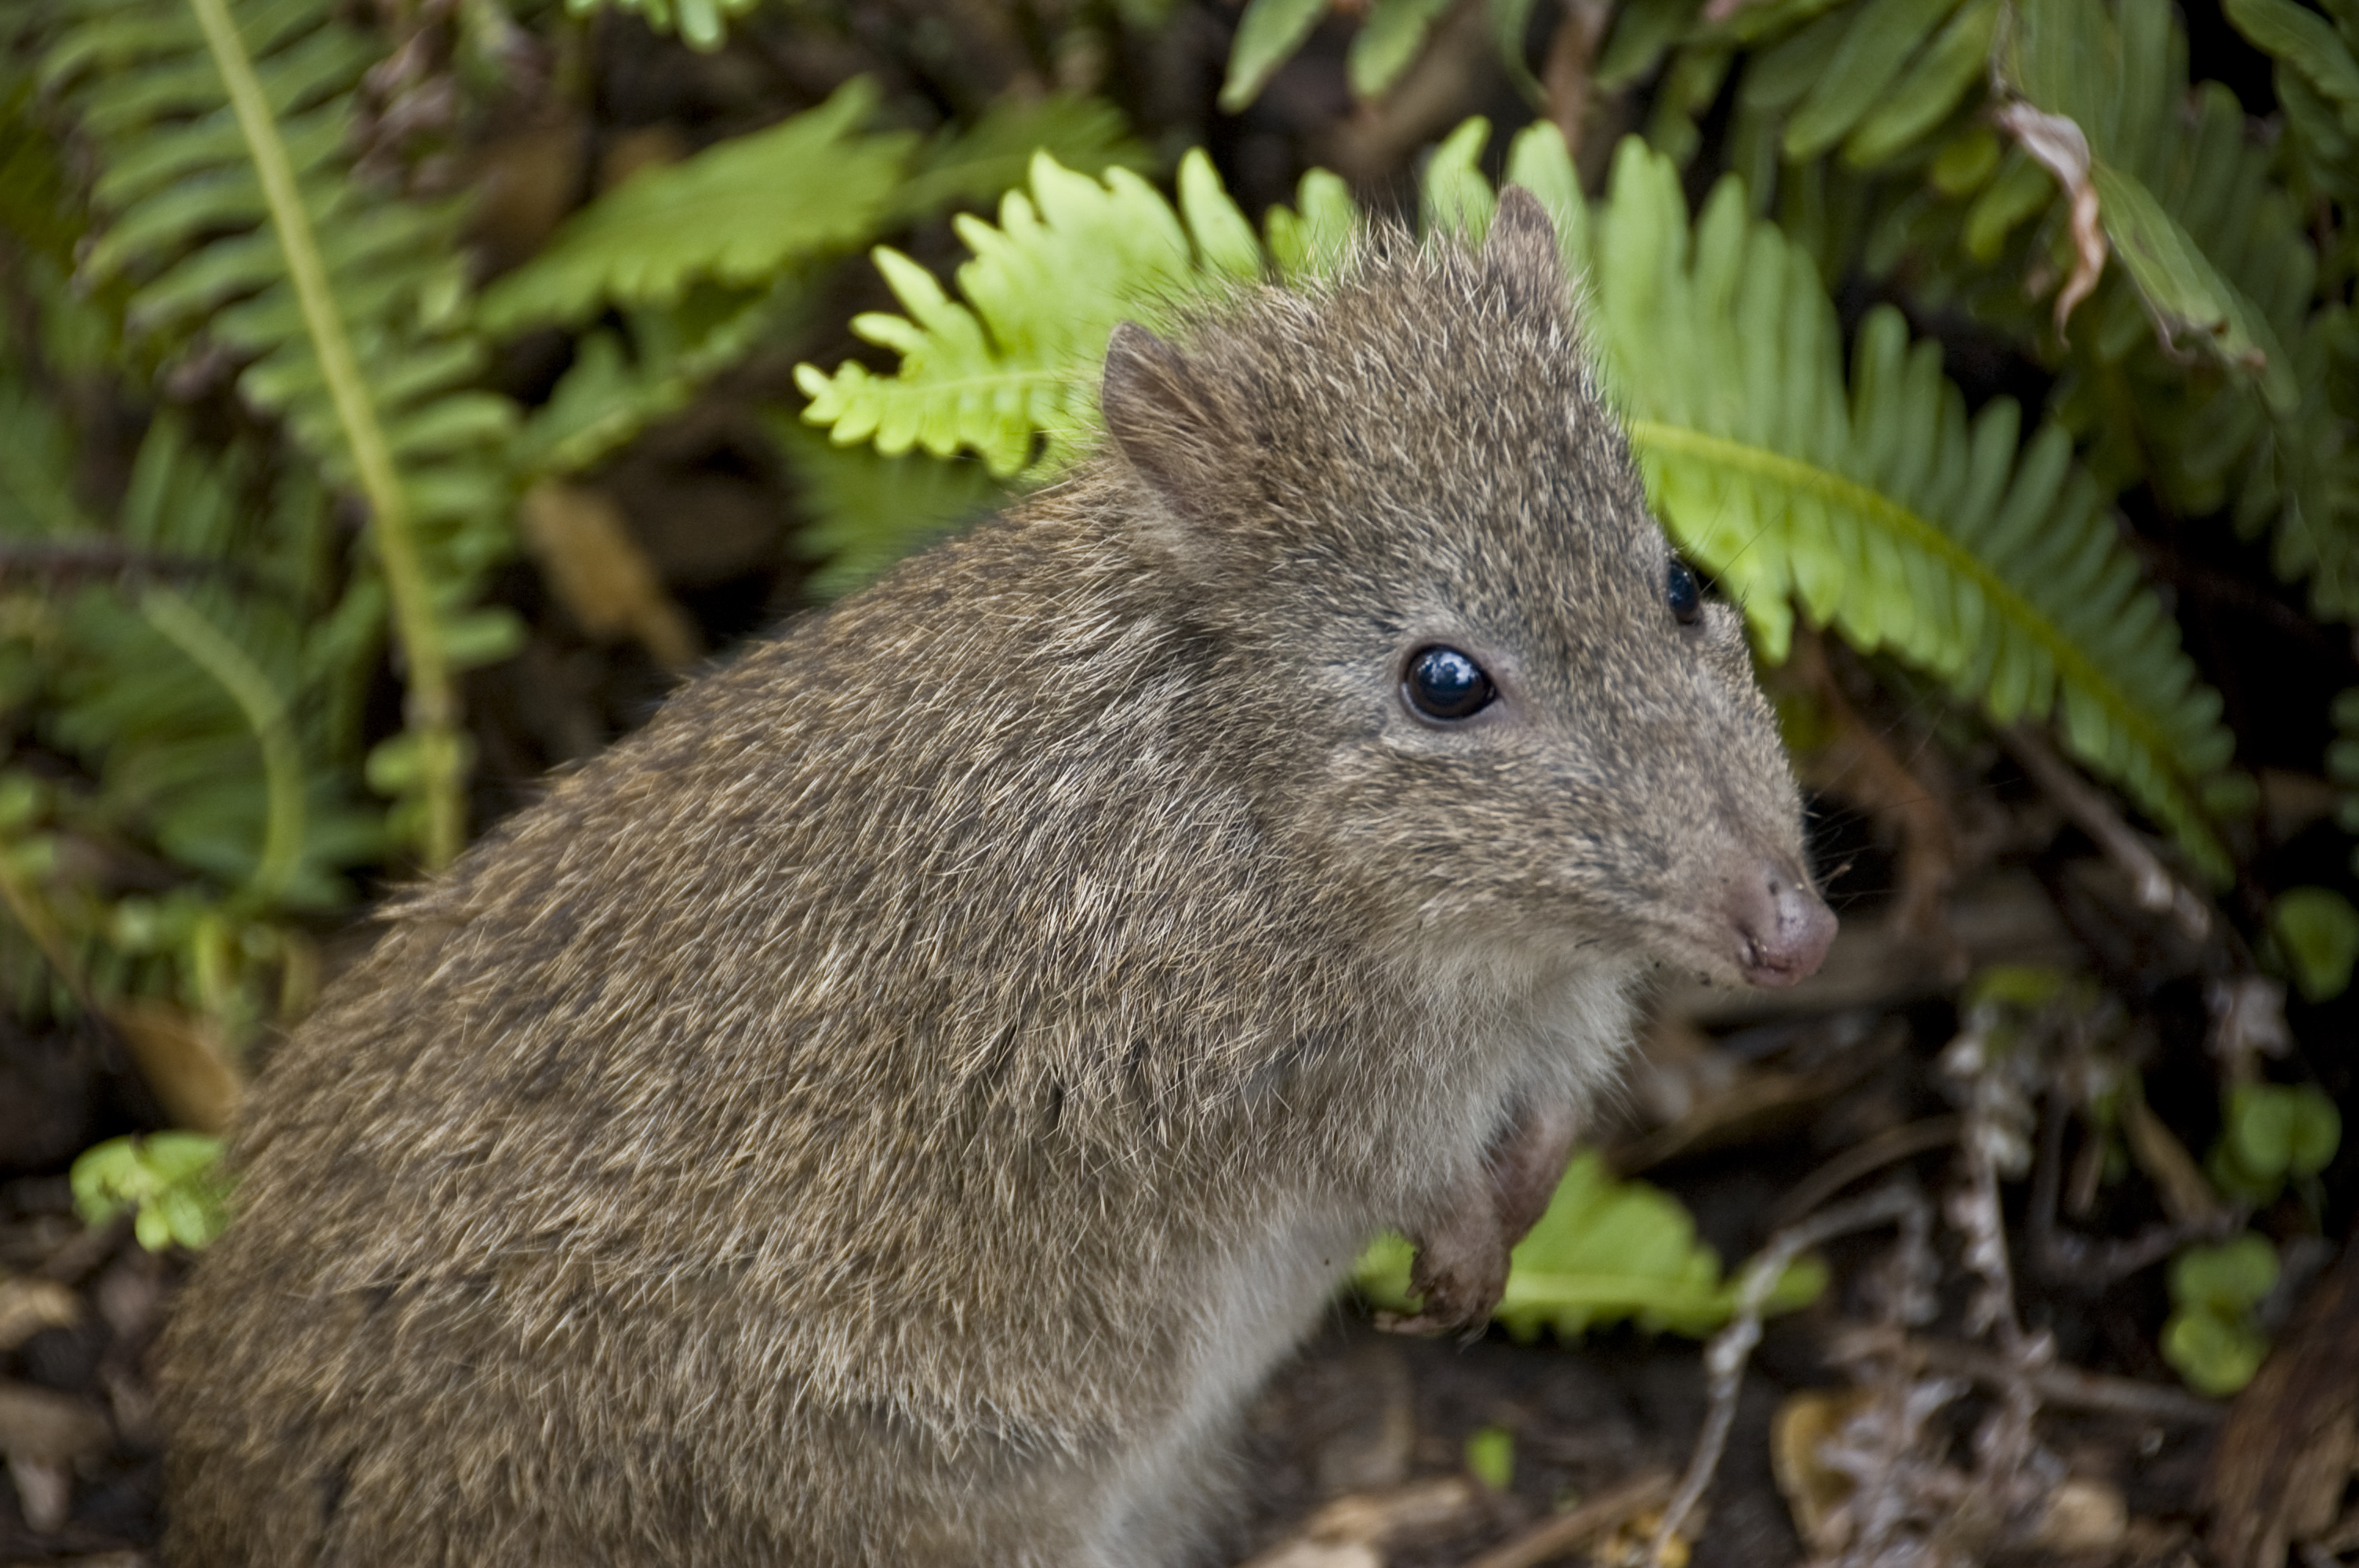 Keeping an eye and ear out for threatened species